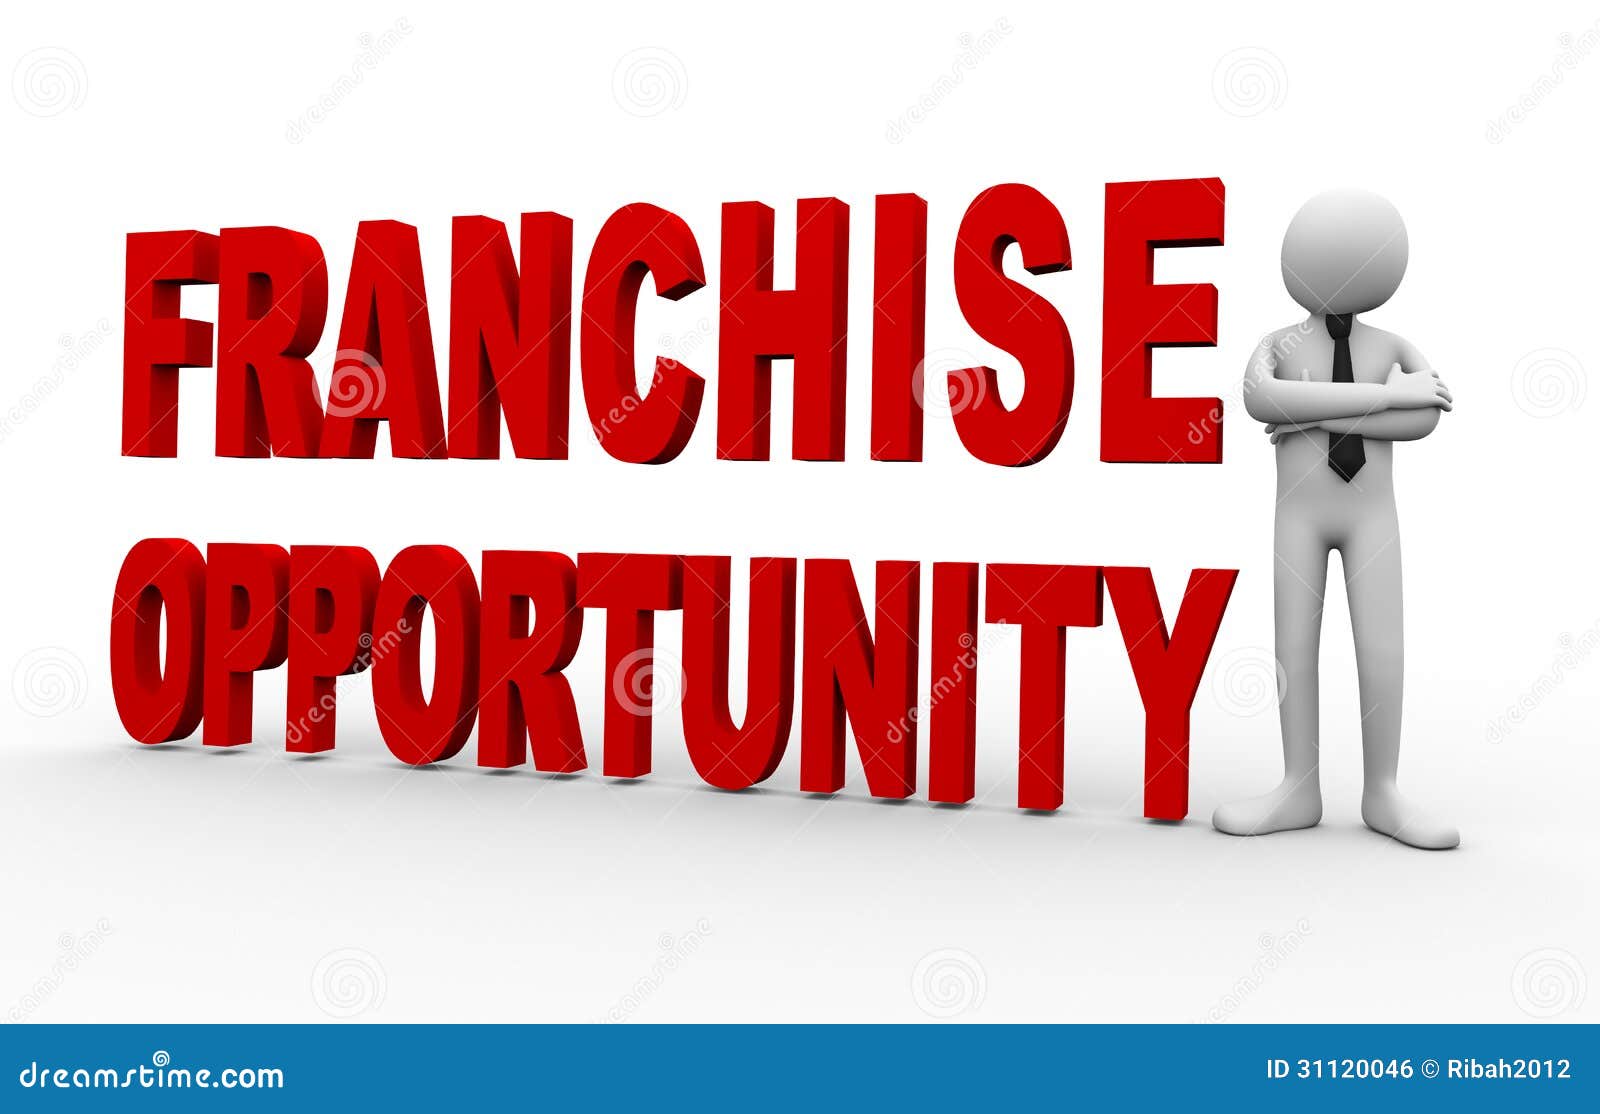 business opportunity clipart - photo #8